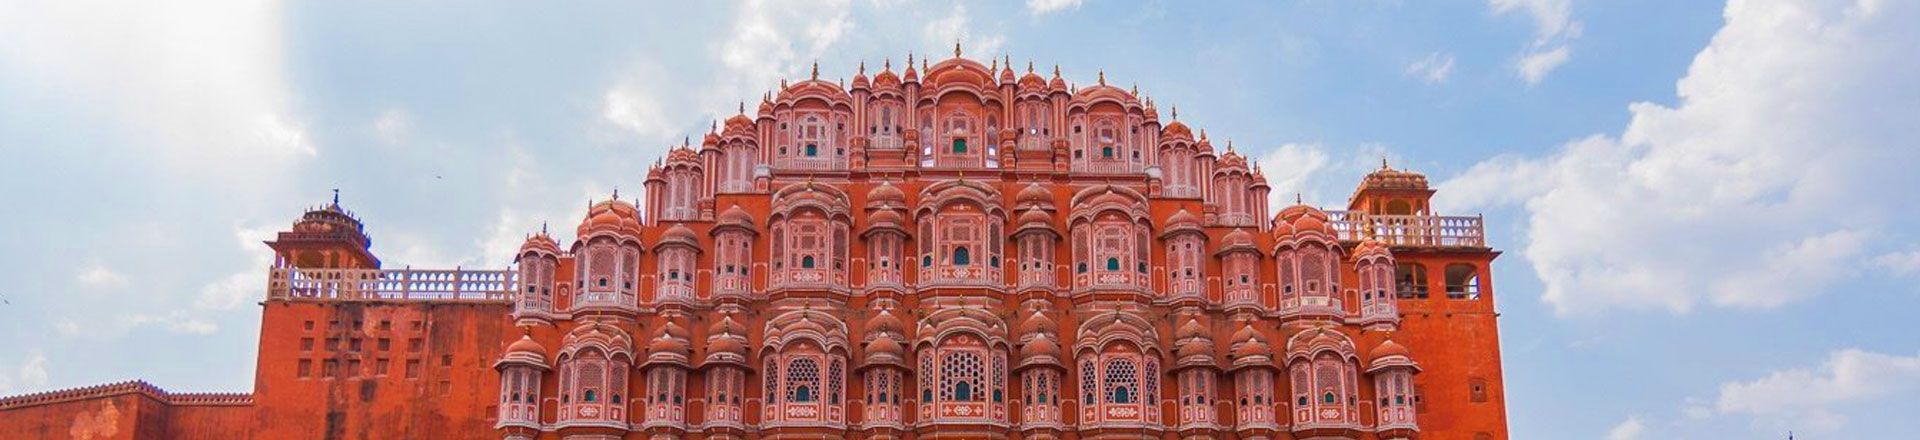 5 Days 4 Nights Golden Triangle Tour Packages